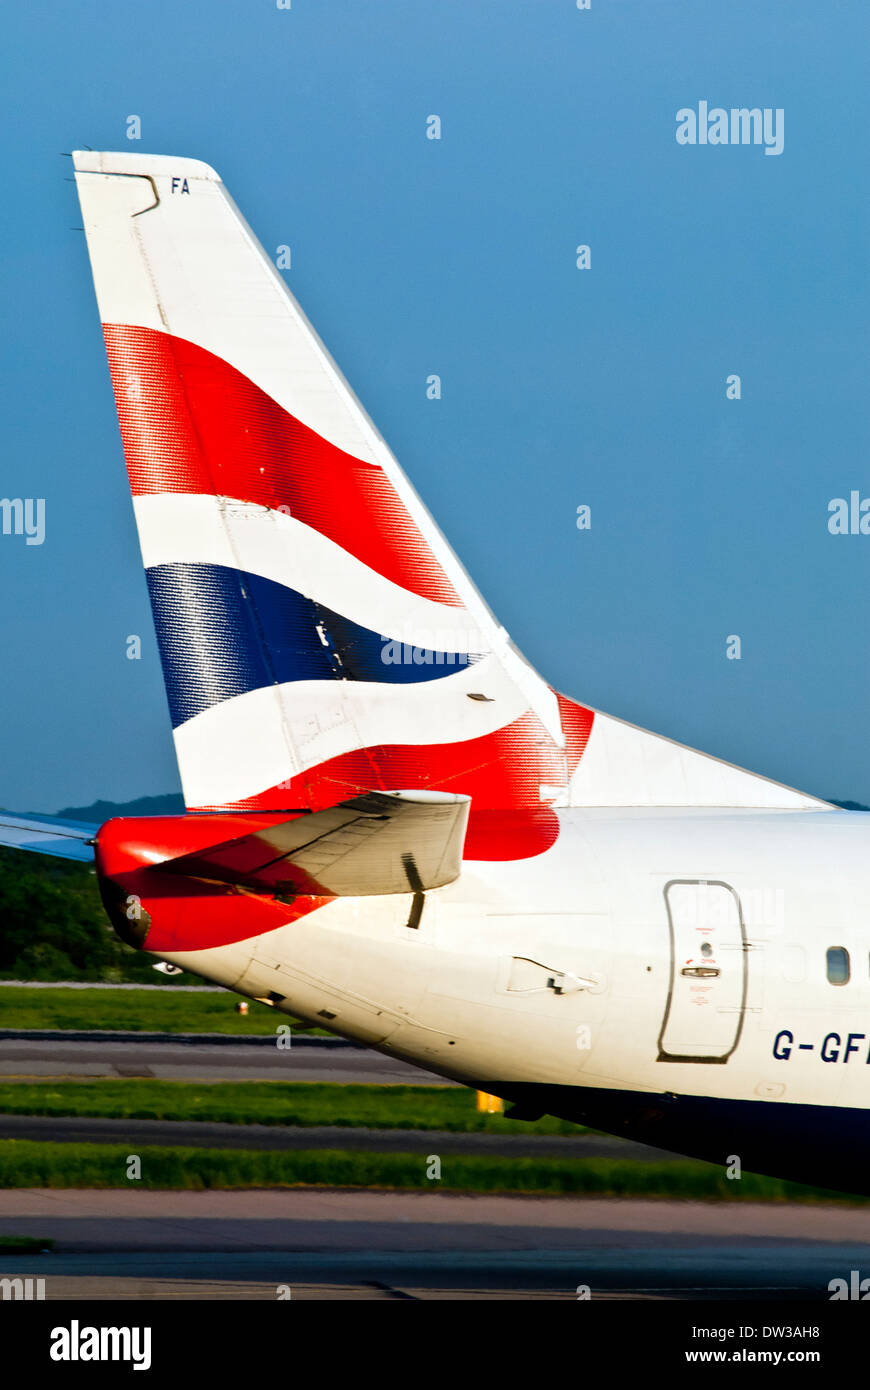 The tail fin of a British Airways jet taxiing at Manchester Airport, UK Stock Photo